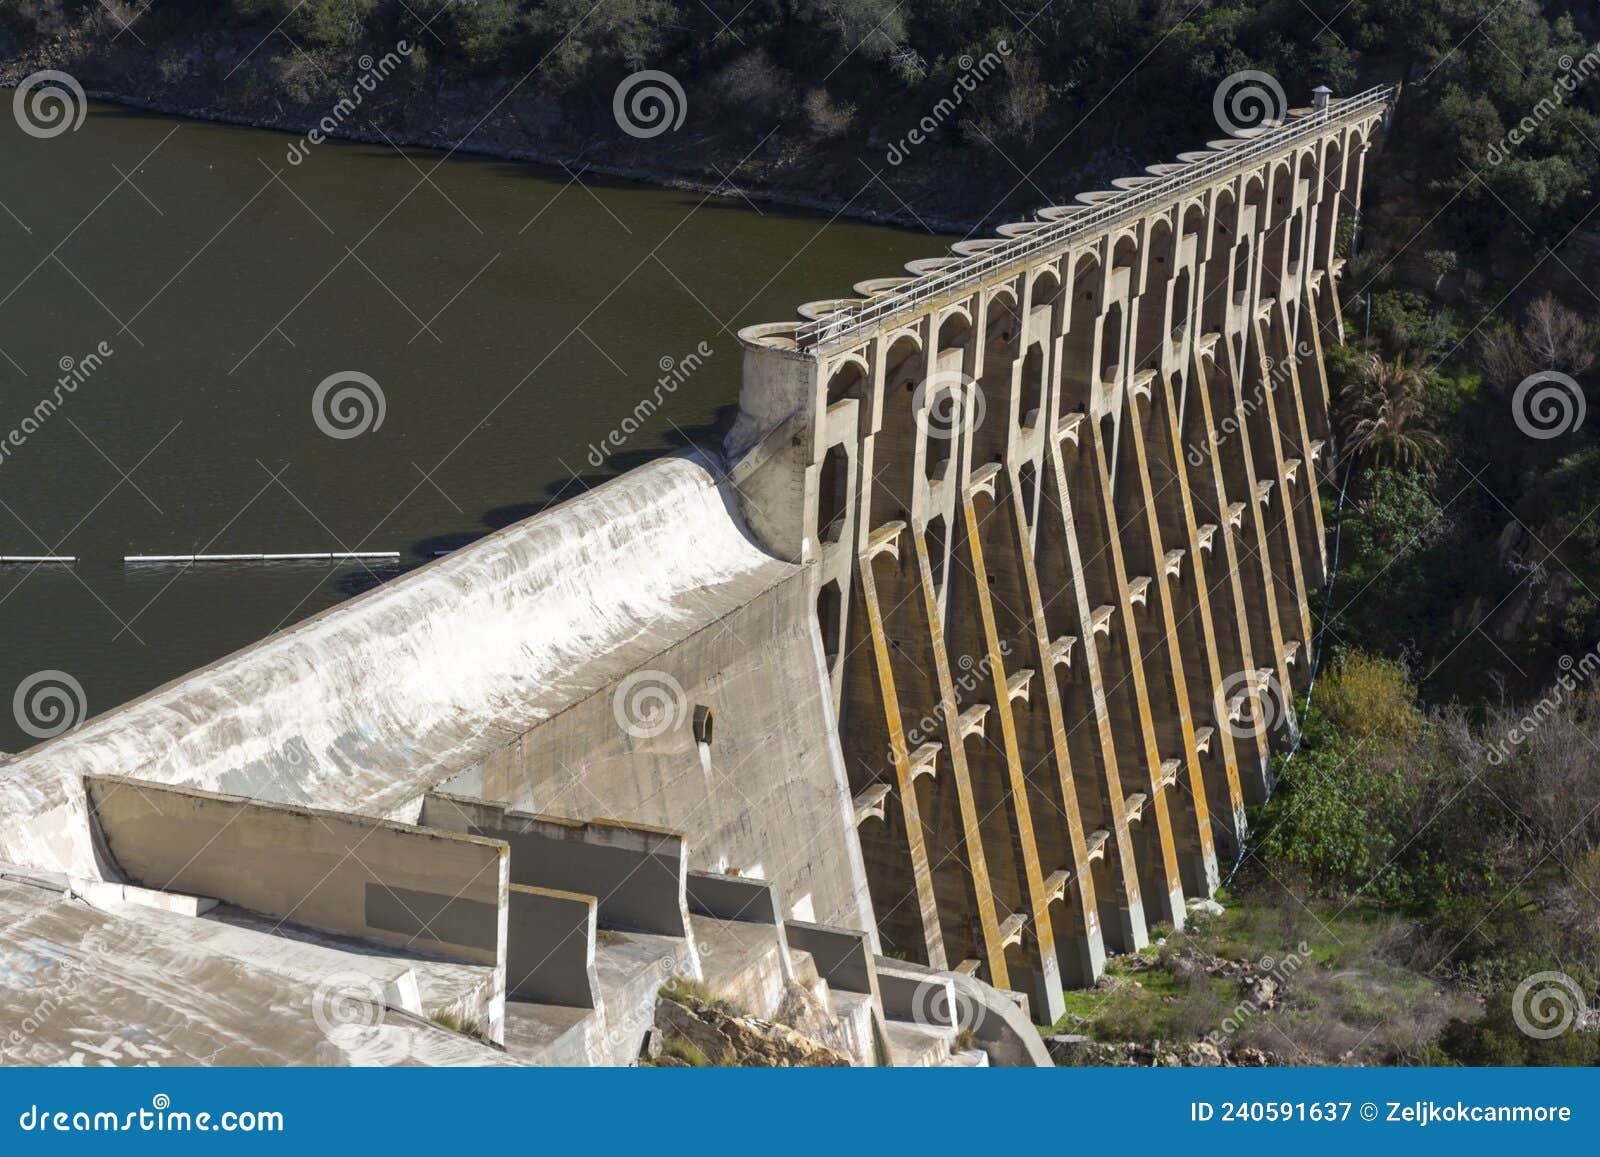 hydroelectric multiple arch concrete dam at lake hodges